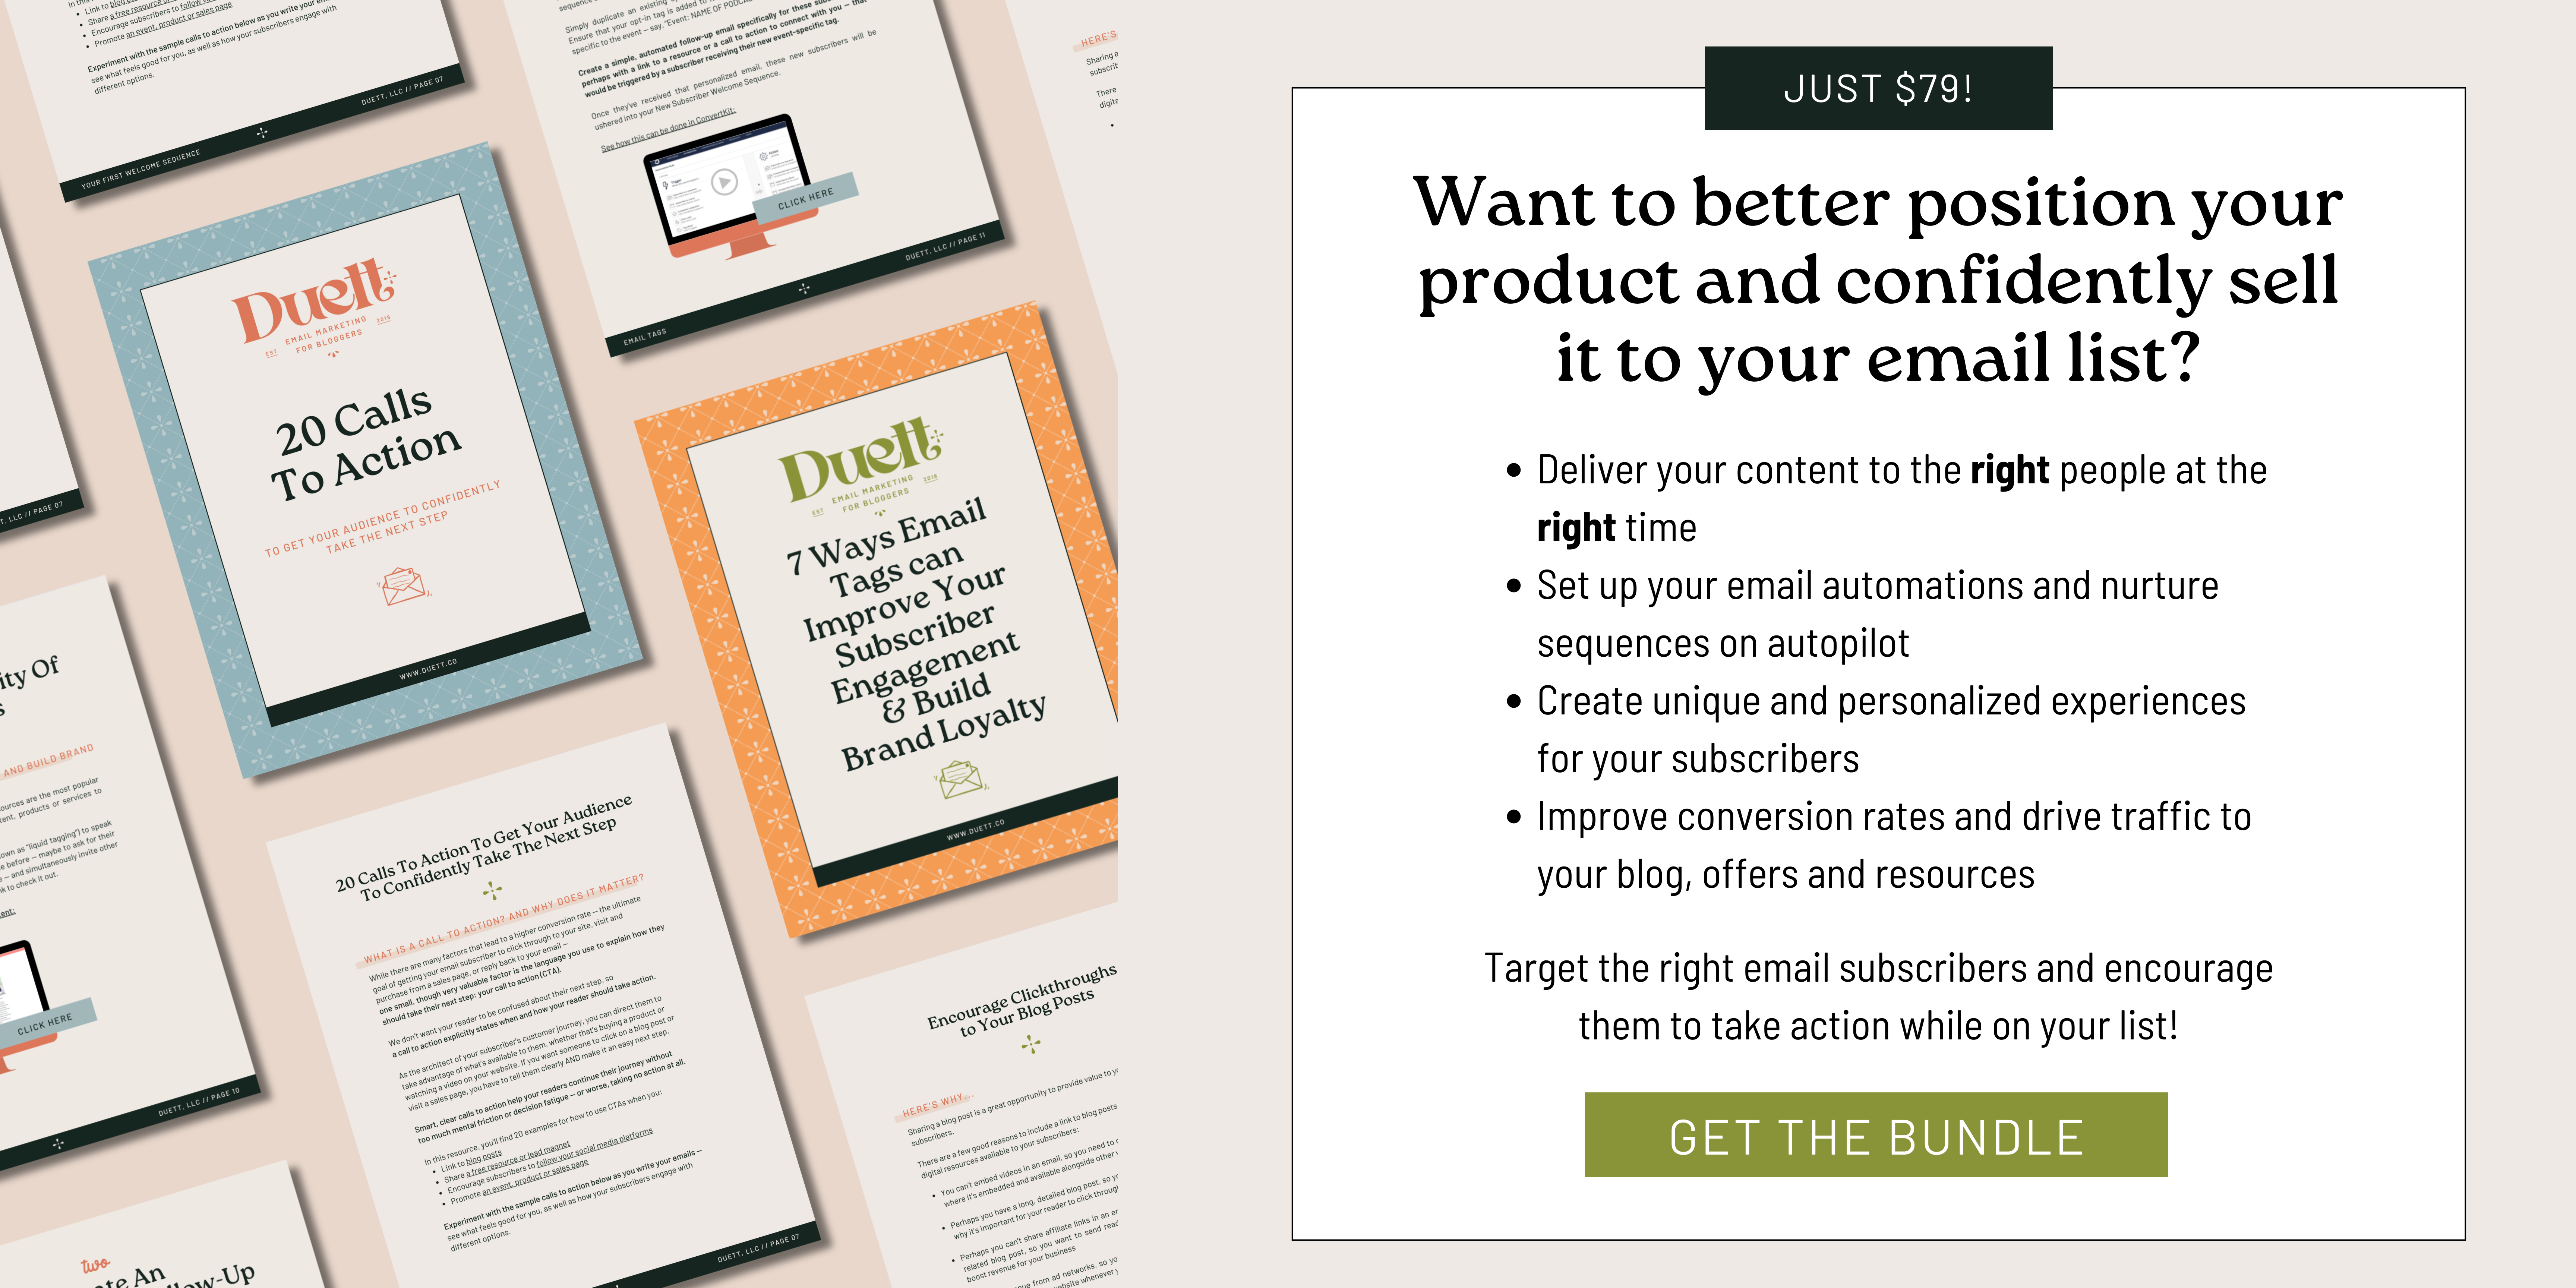 Bundle to better position your product and confidently sell to your email list 